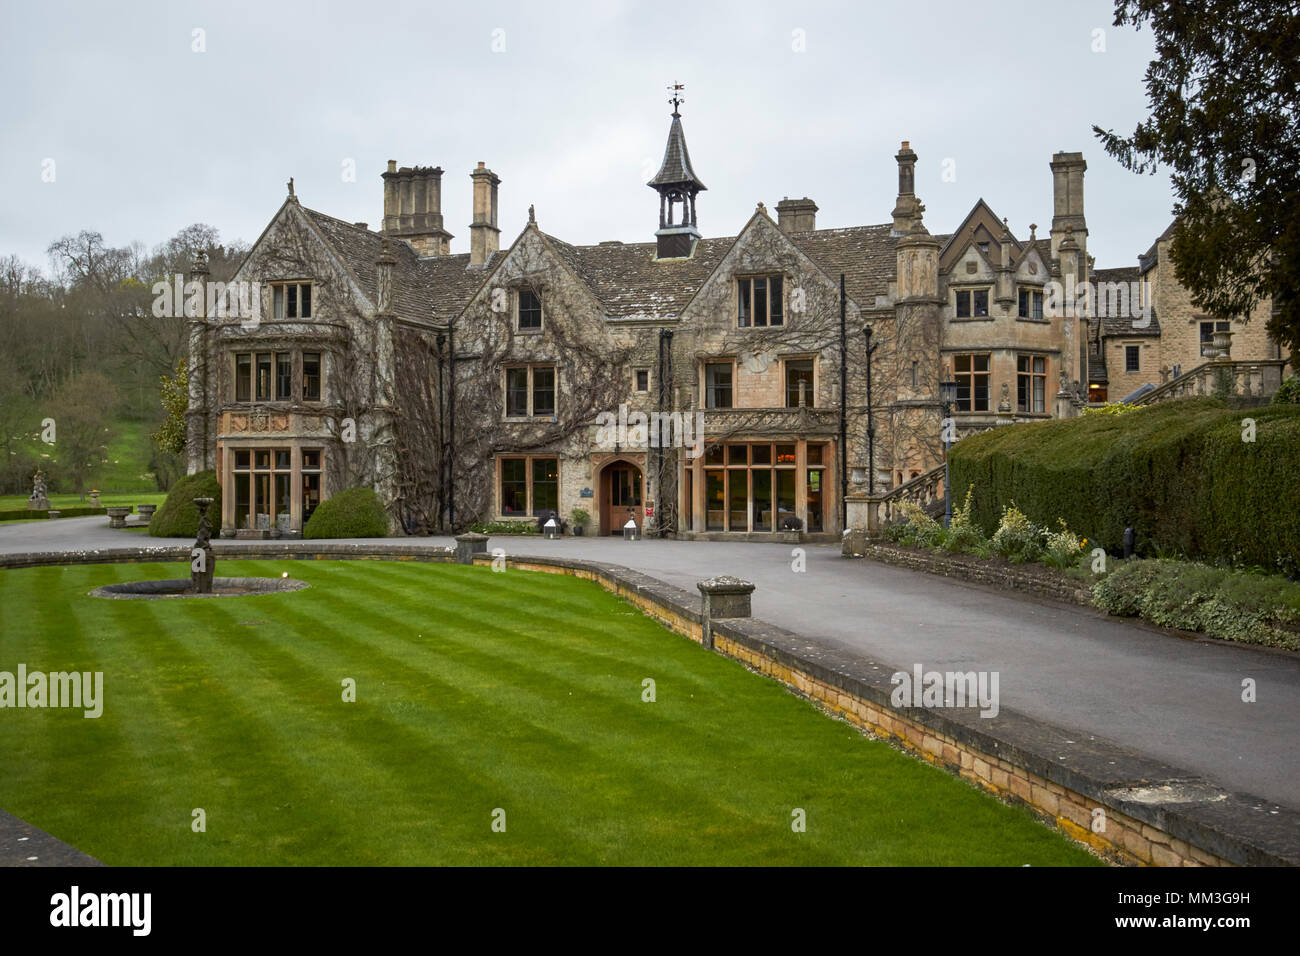 The Manor House Hotel 14th century country house hotel Castle Combe village wiltshire england uk Stock Photo